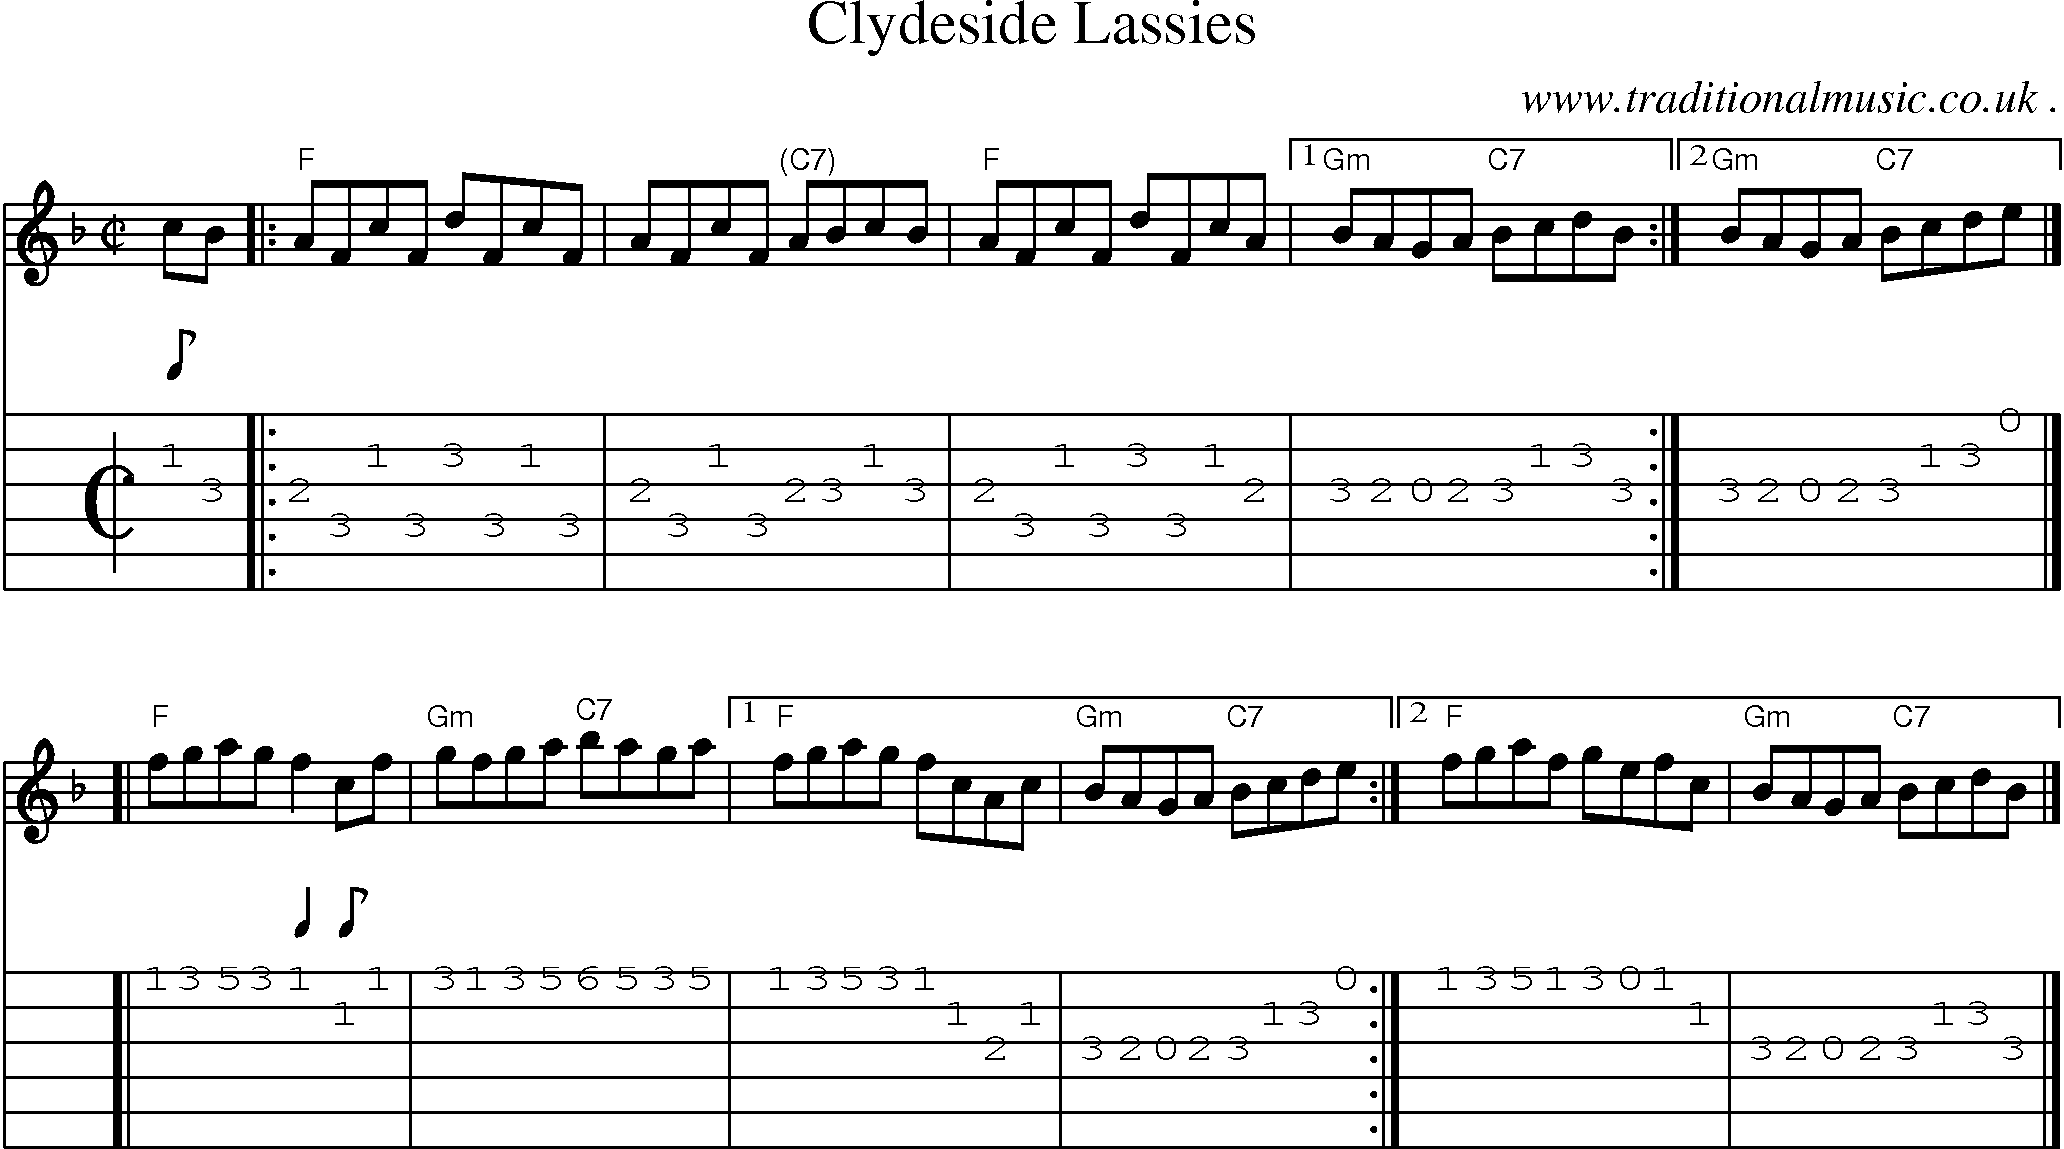 Sheet-music  score, Chords and Guitar Tabs for Clydeside Lassies